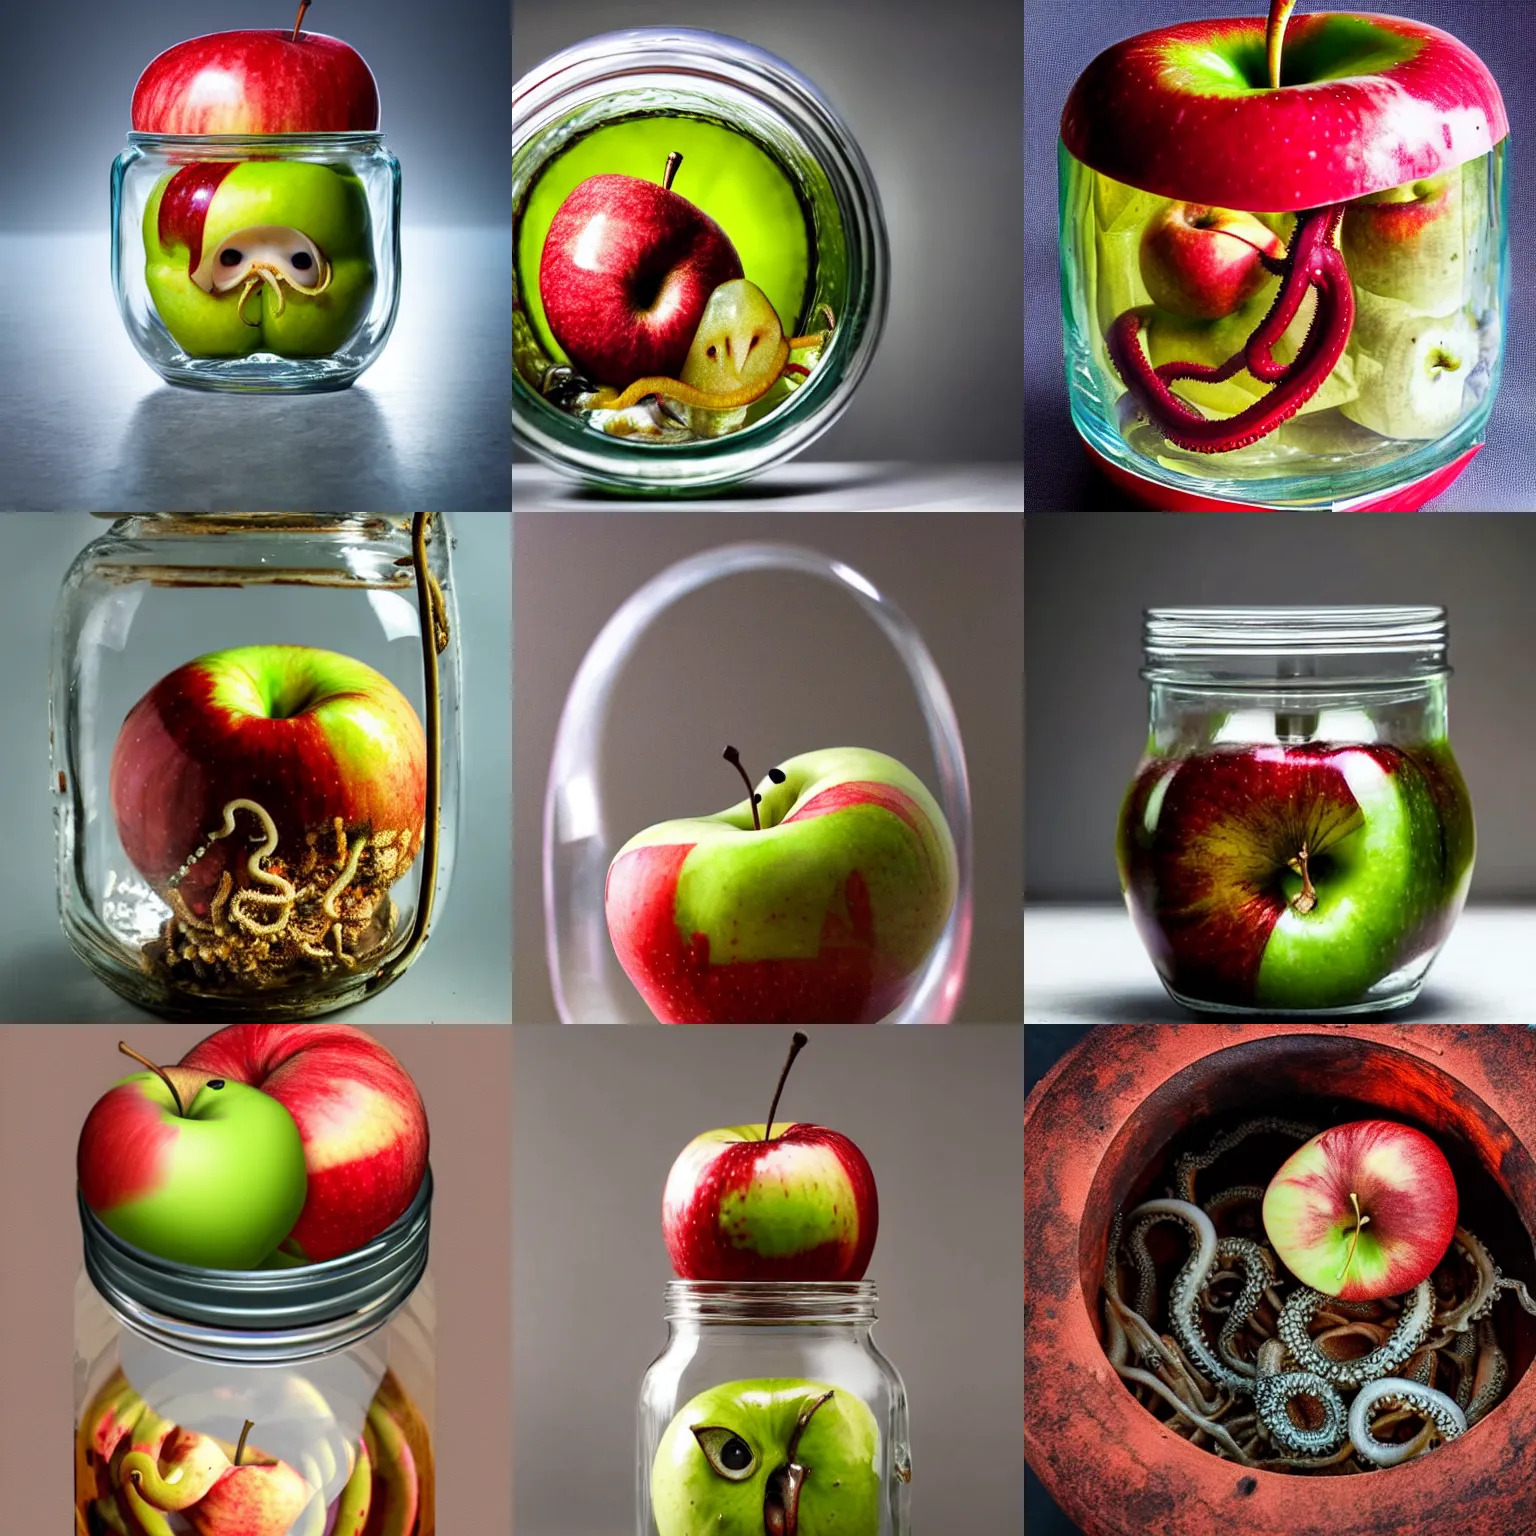 Prompt: rotten apple with tentacles coming out of it inside a glass jar